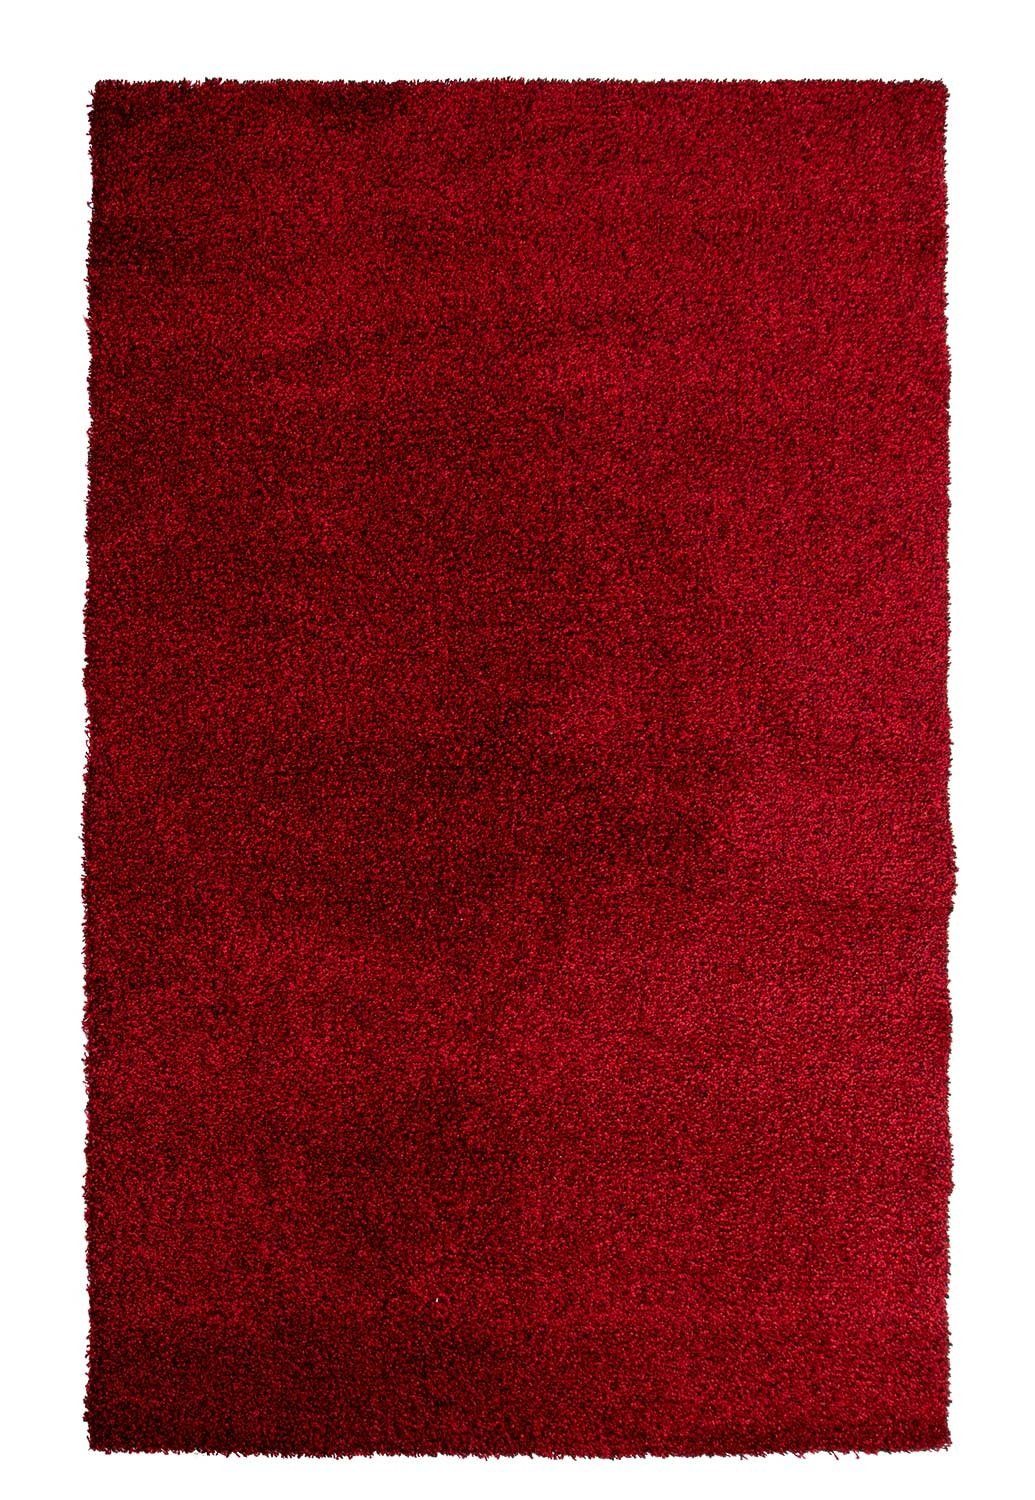 Teppich DELIGHT COSY, Polyester, Rot, 80 x 150 cm, Balta Rugs, rechteckig, Höhe: 22 mm